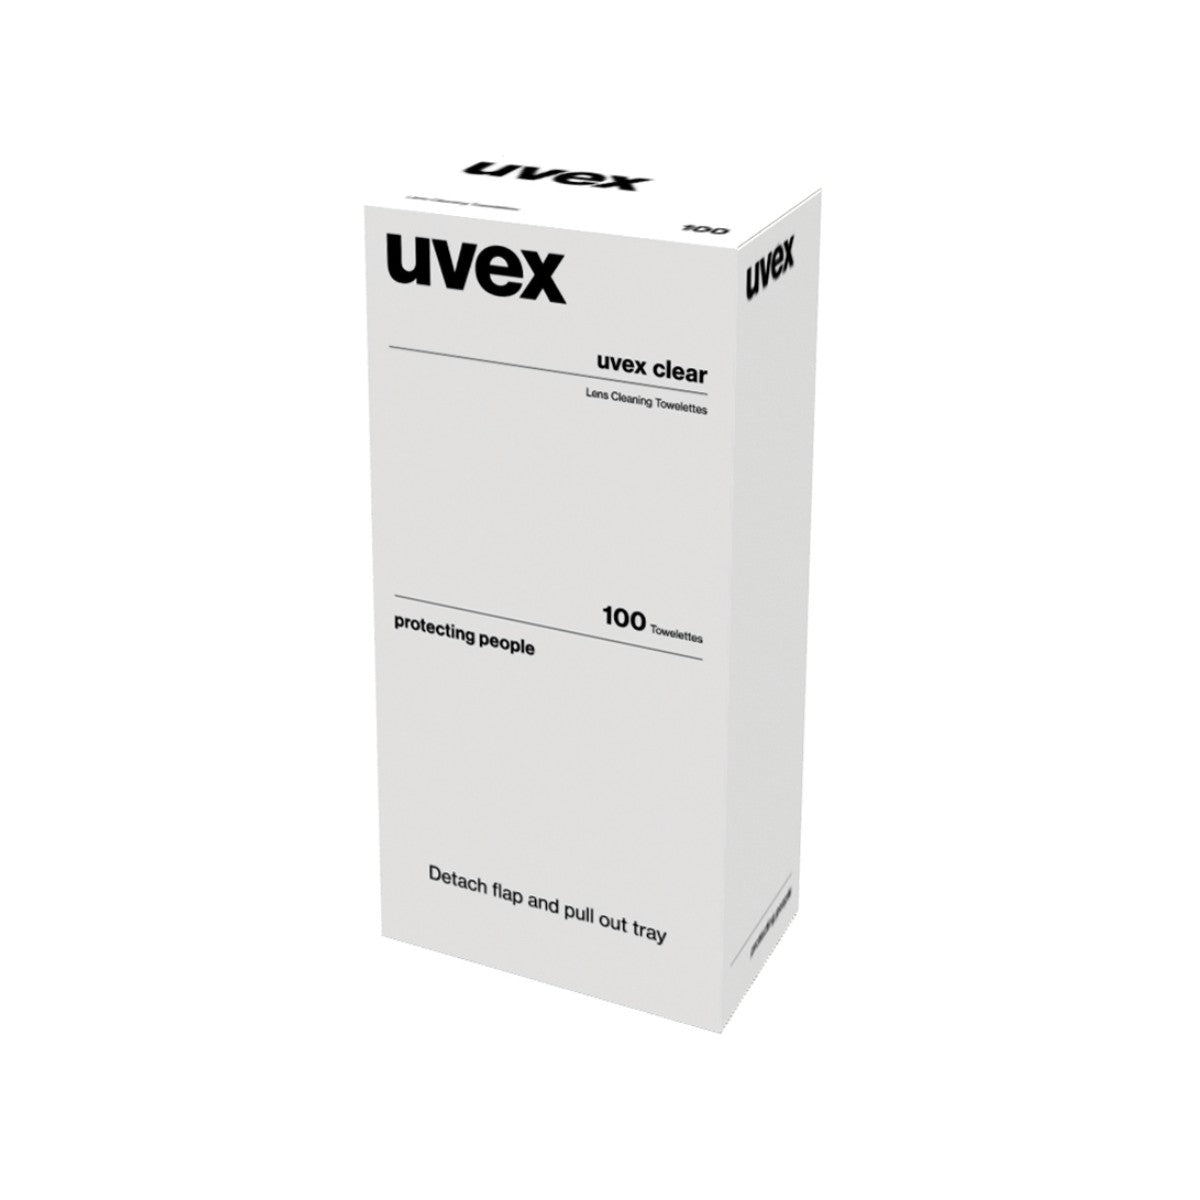 uvex Lens Cleaning Towelettes 1005 (Box of 100)